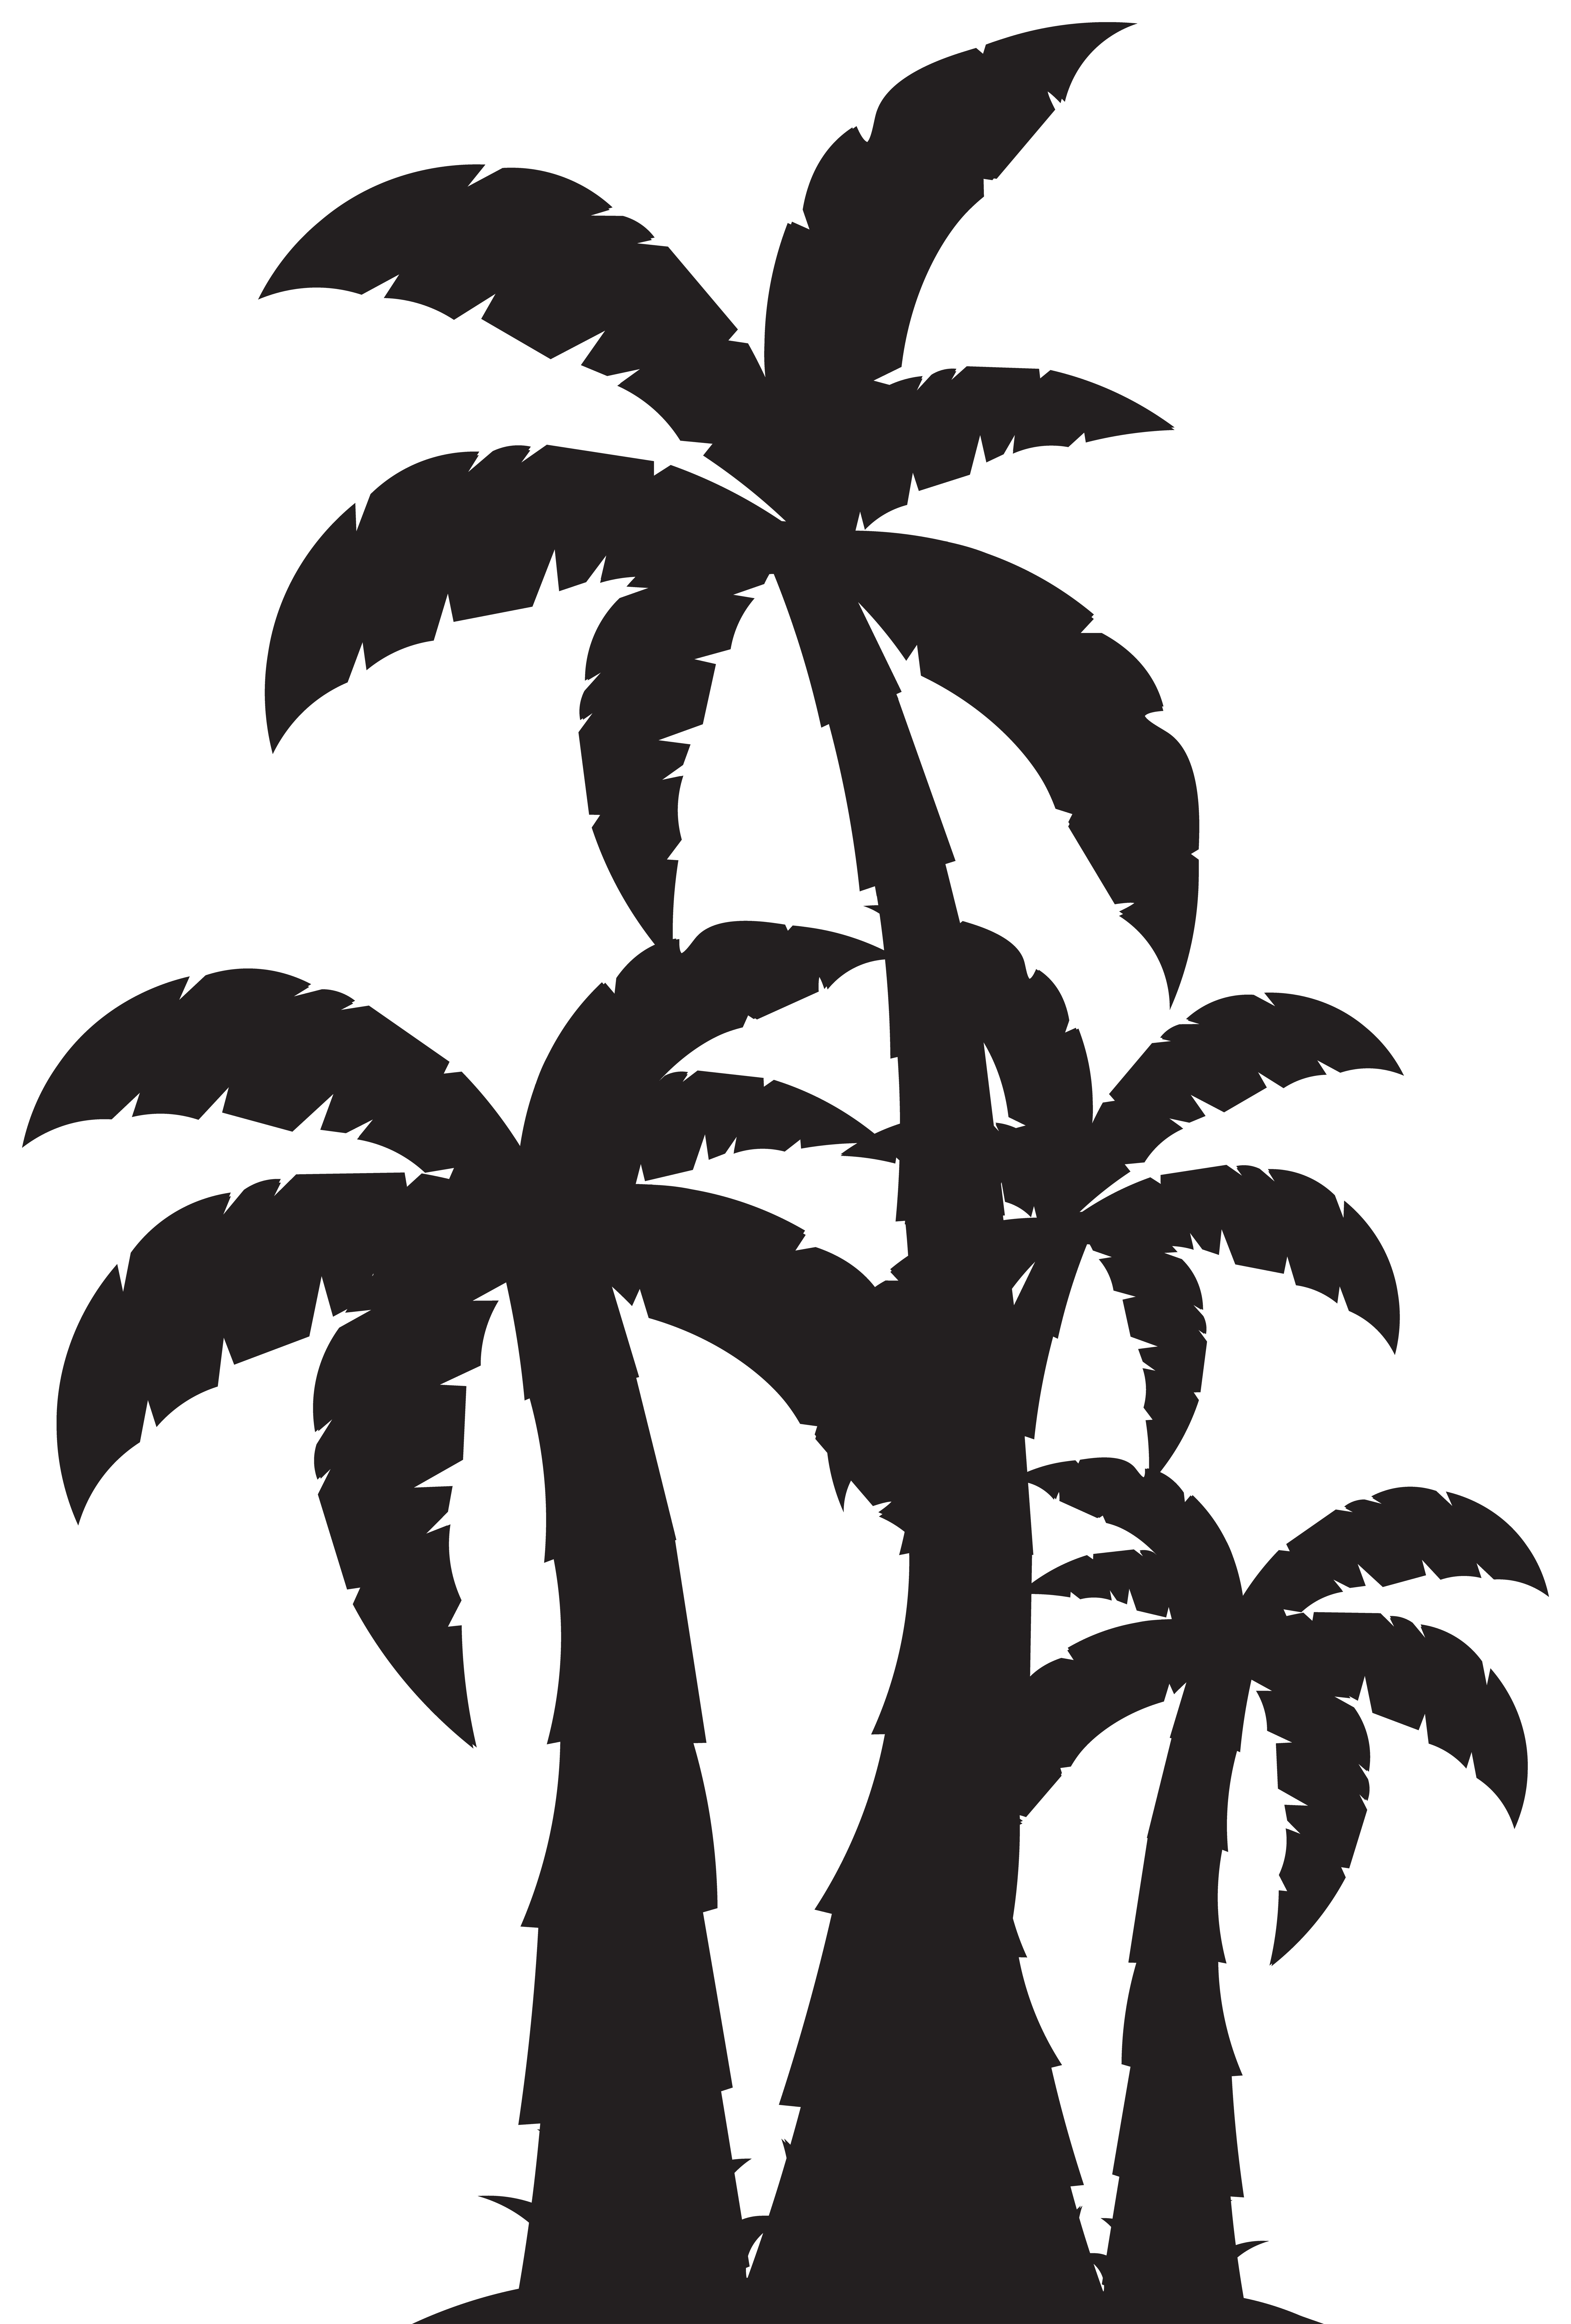 Outline clipart palm tree, Outline palm tree Transparent FREE for